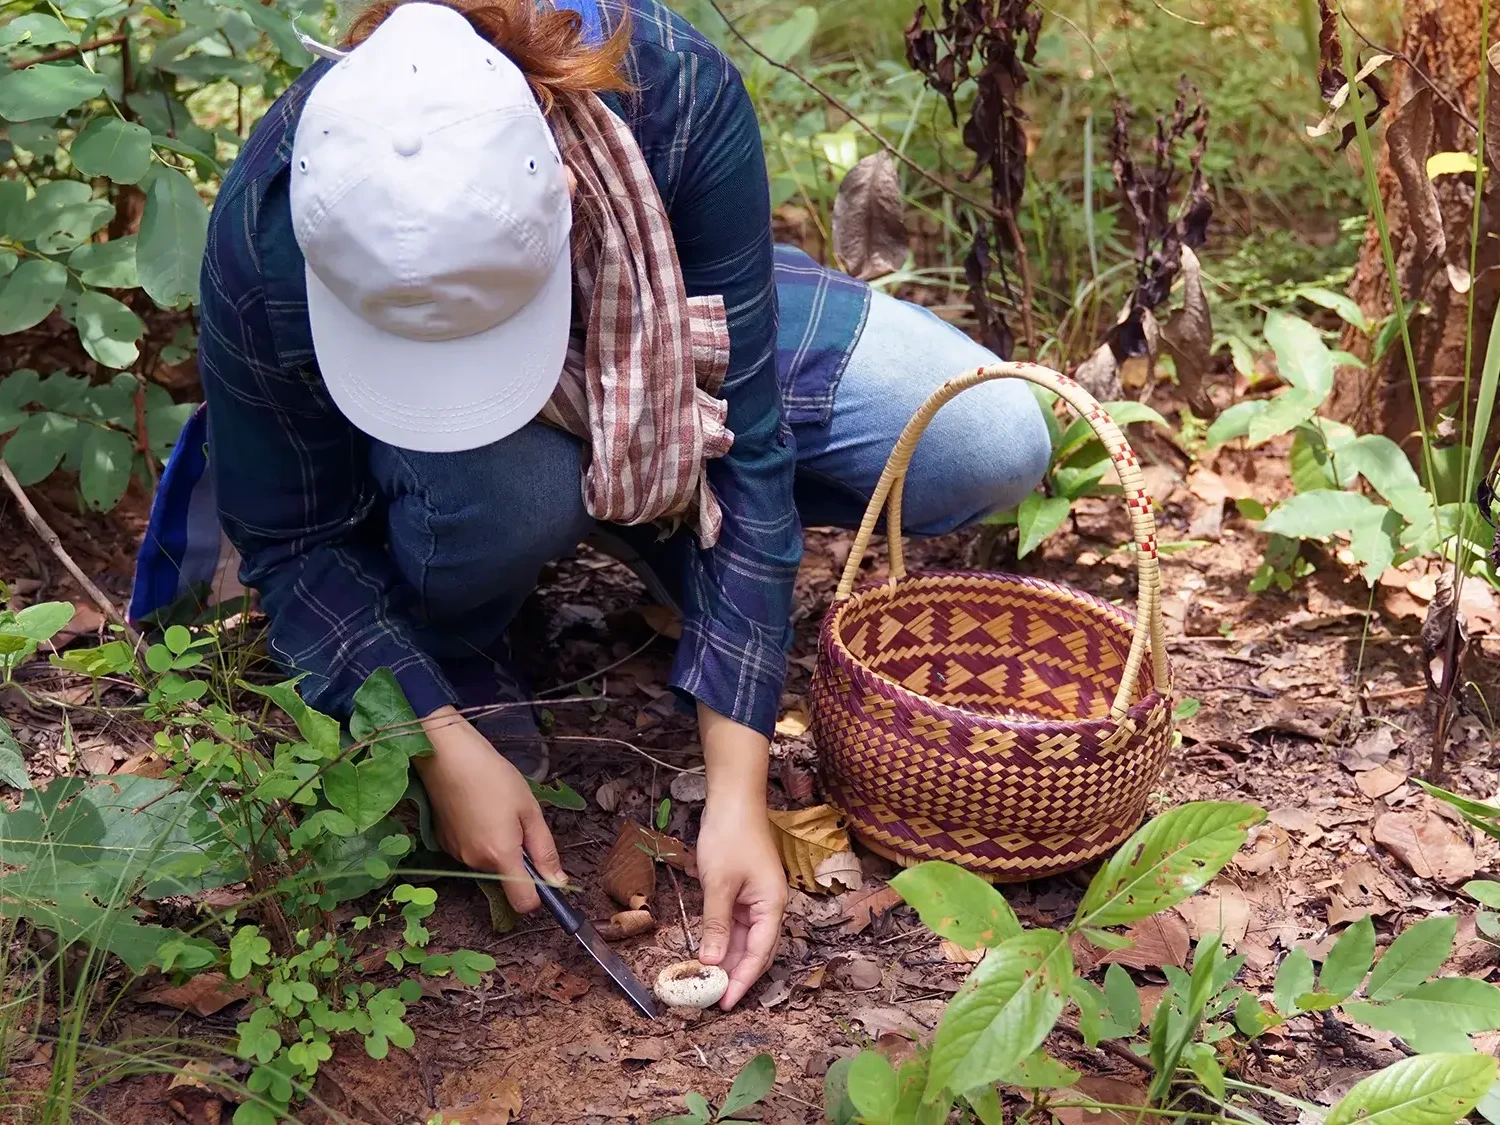 women picking wild mushroom in forest during team building event